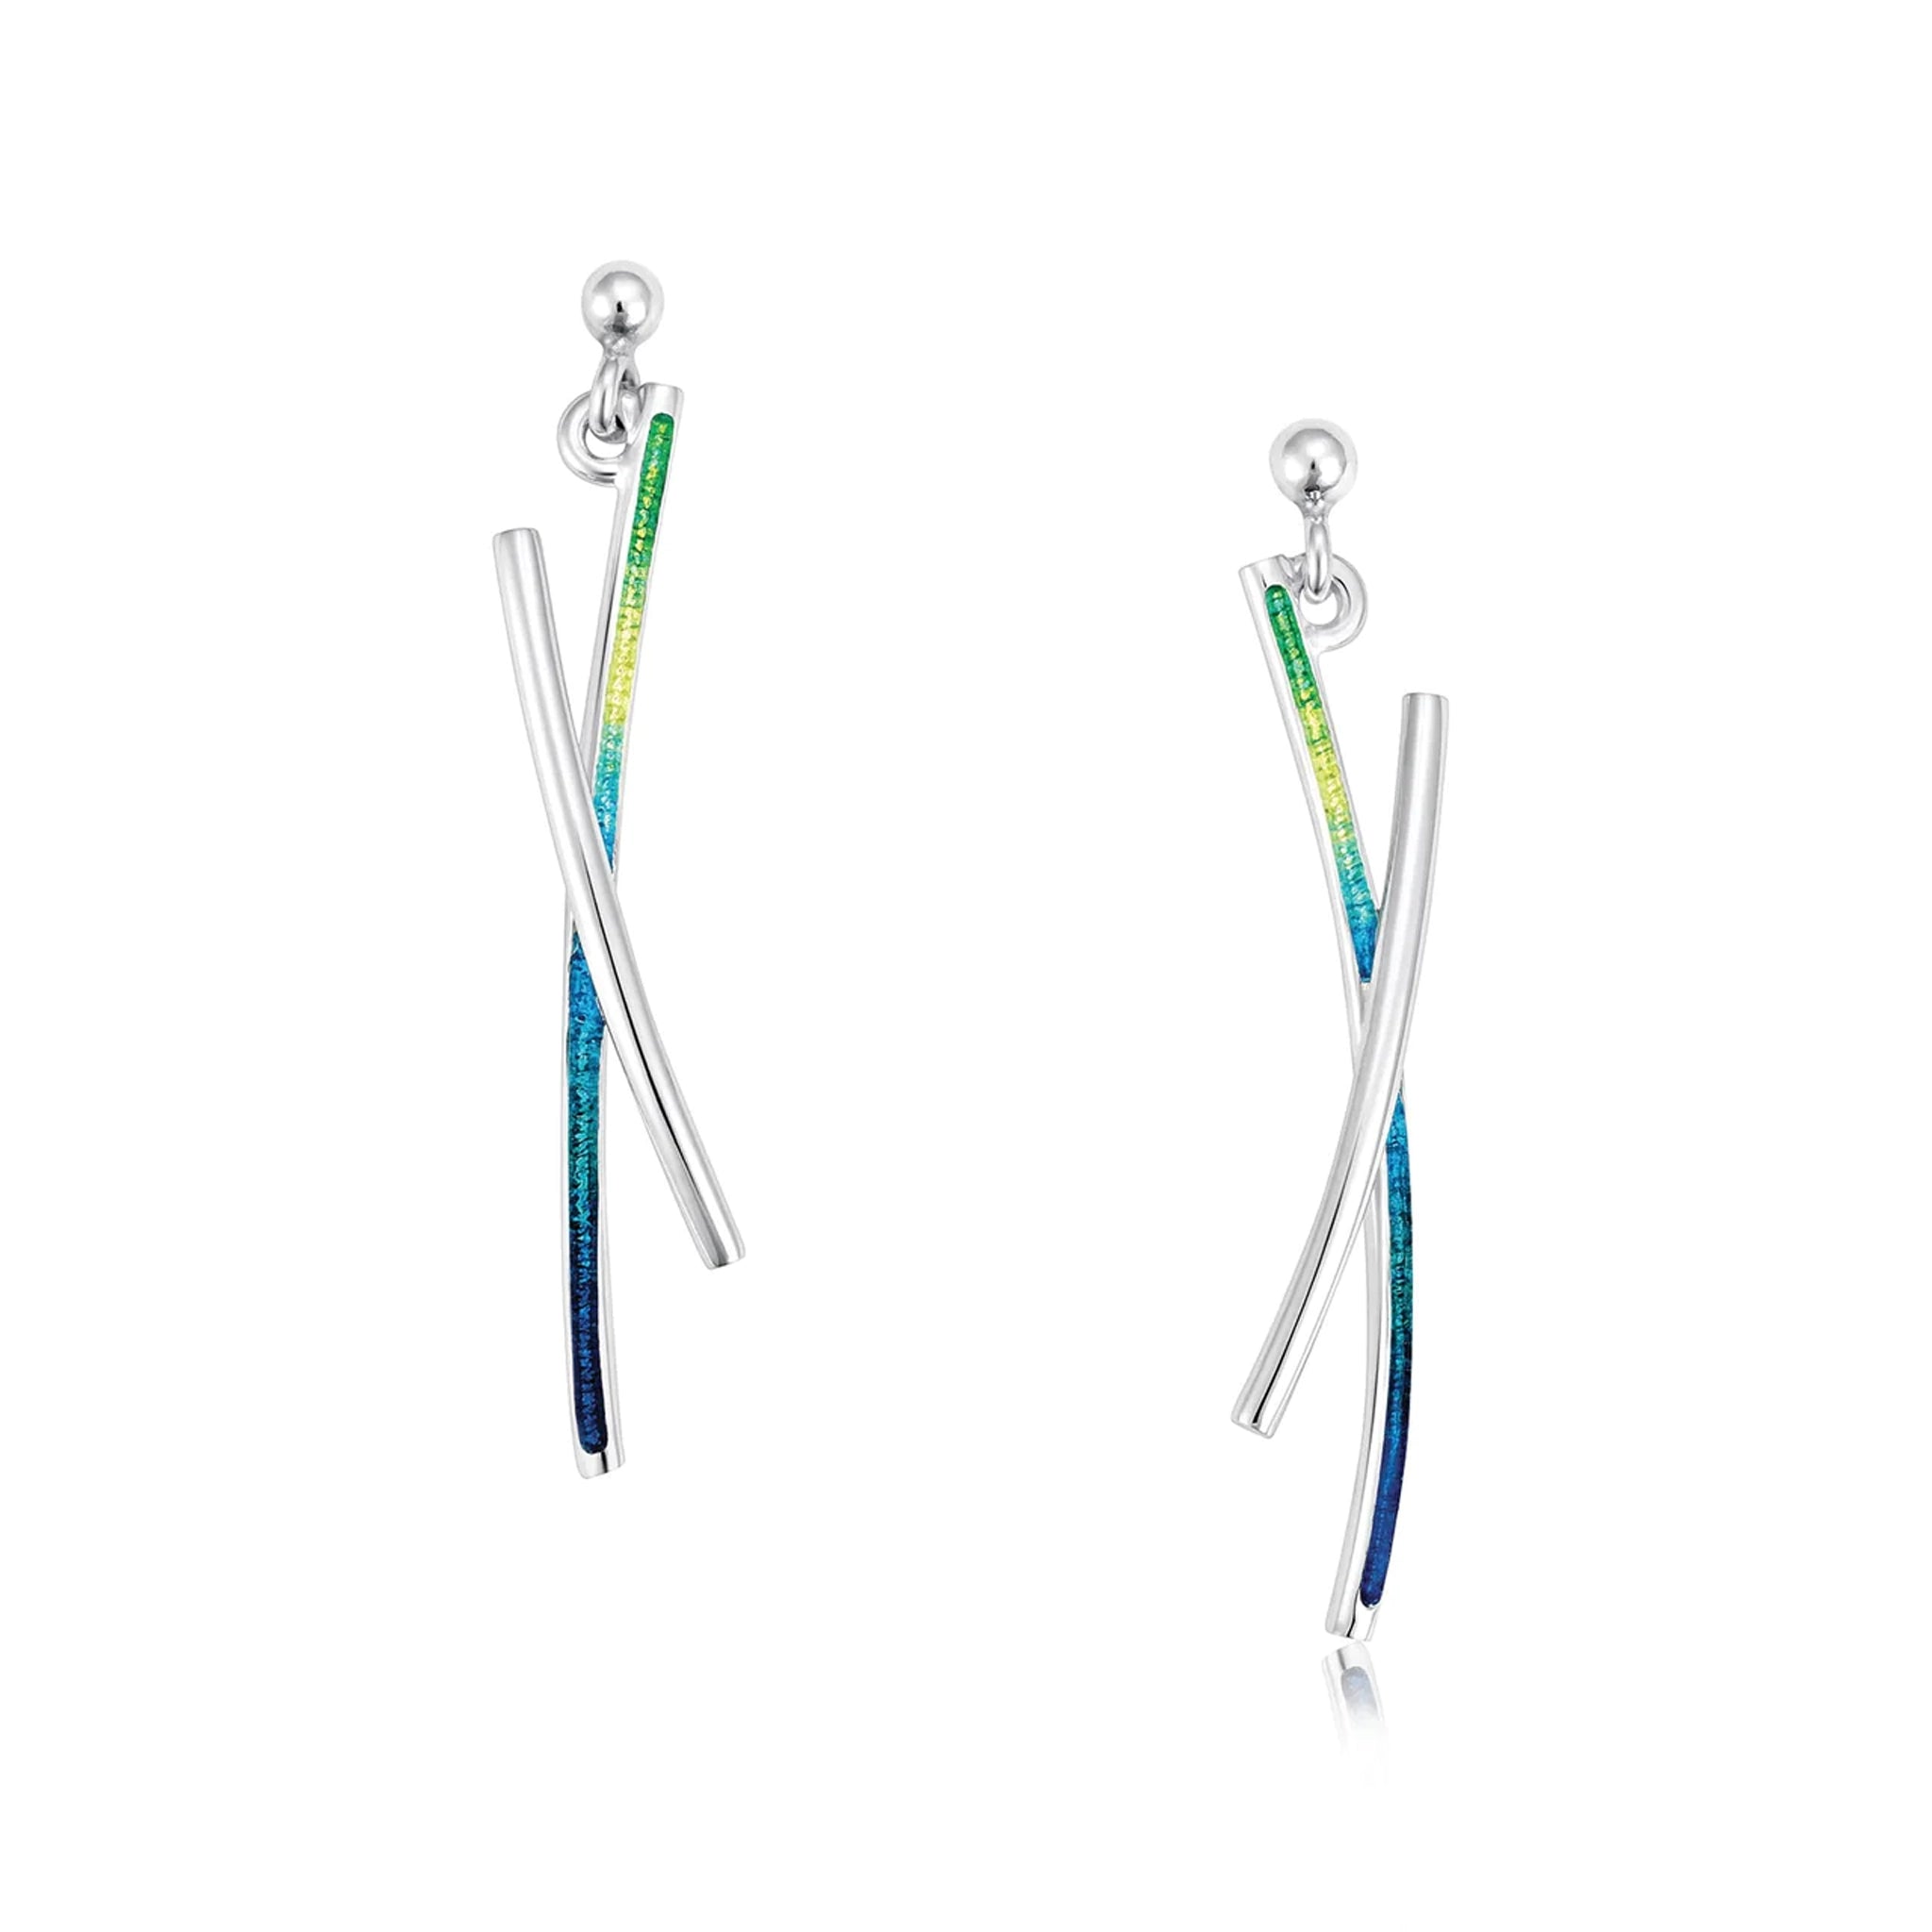 Silver earrings with two strands, one silver and one in green and blue enamel on drop post fitting